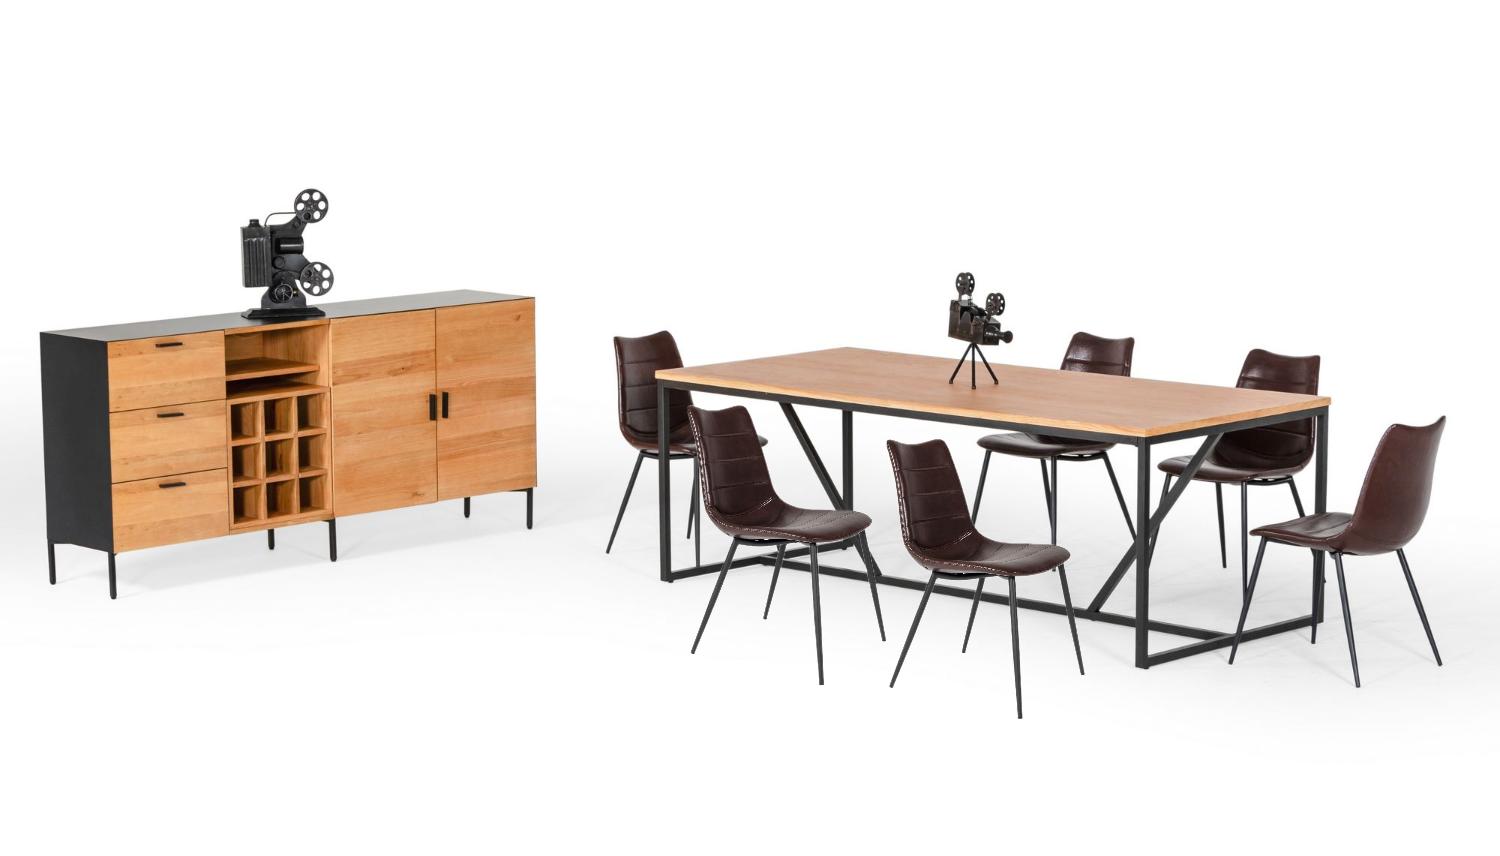 Contemporary, Modern Dining Room Set Fagan Gilliam VGEDMD220005-8pcs in Oak, Brown Leather